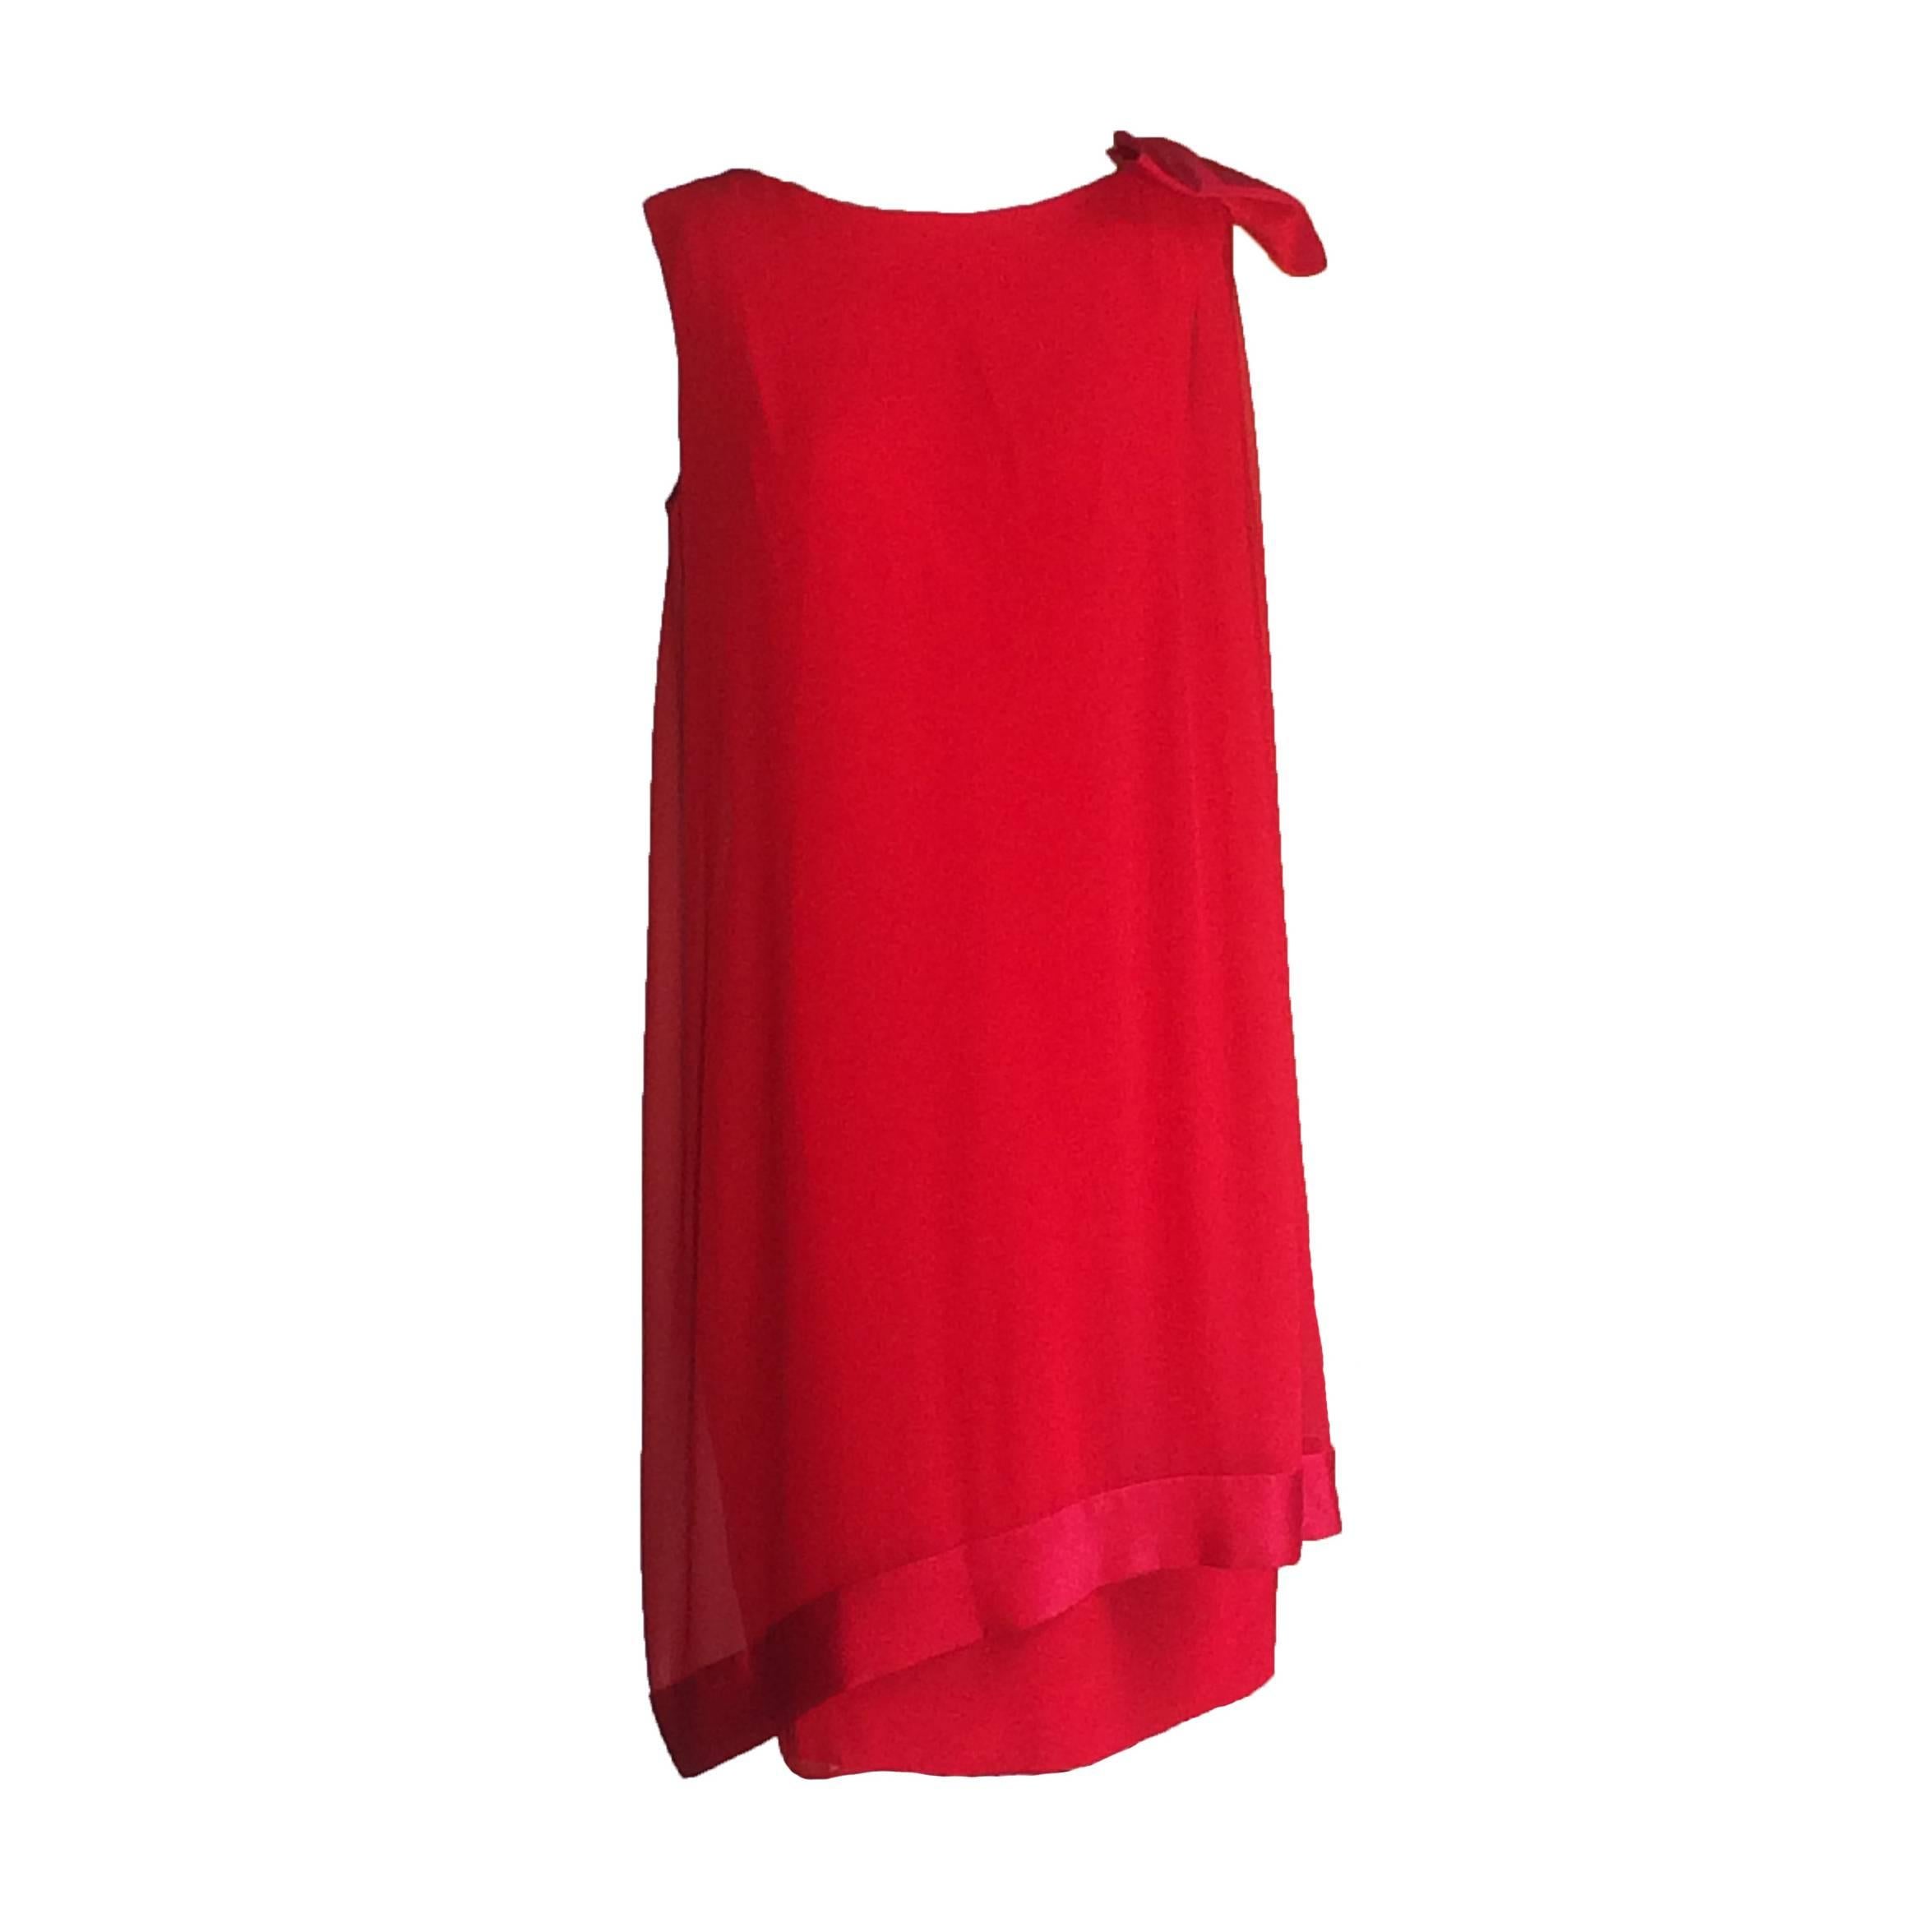 Lilli Diamond 1970s Bright Red Crinkle Crepe Shift with Giant Bow at Shoulder For Sale